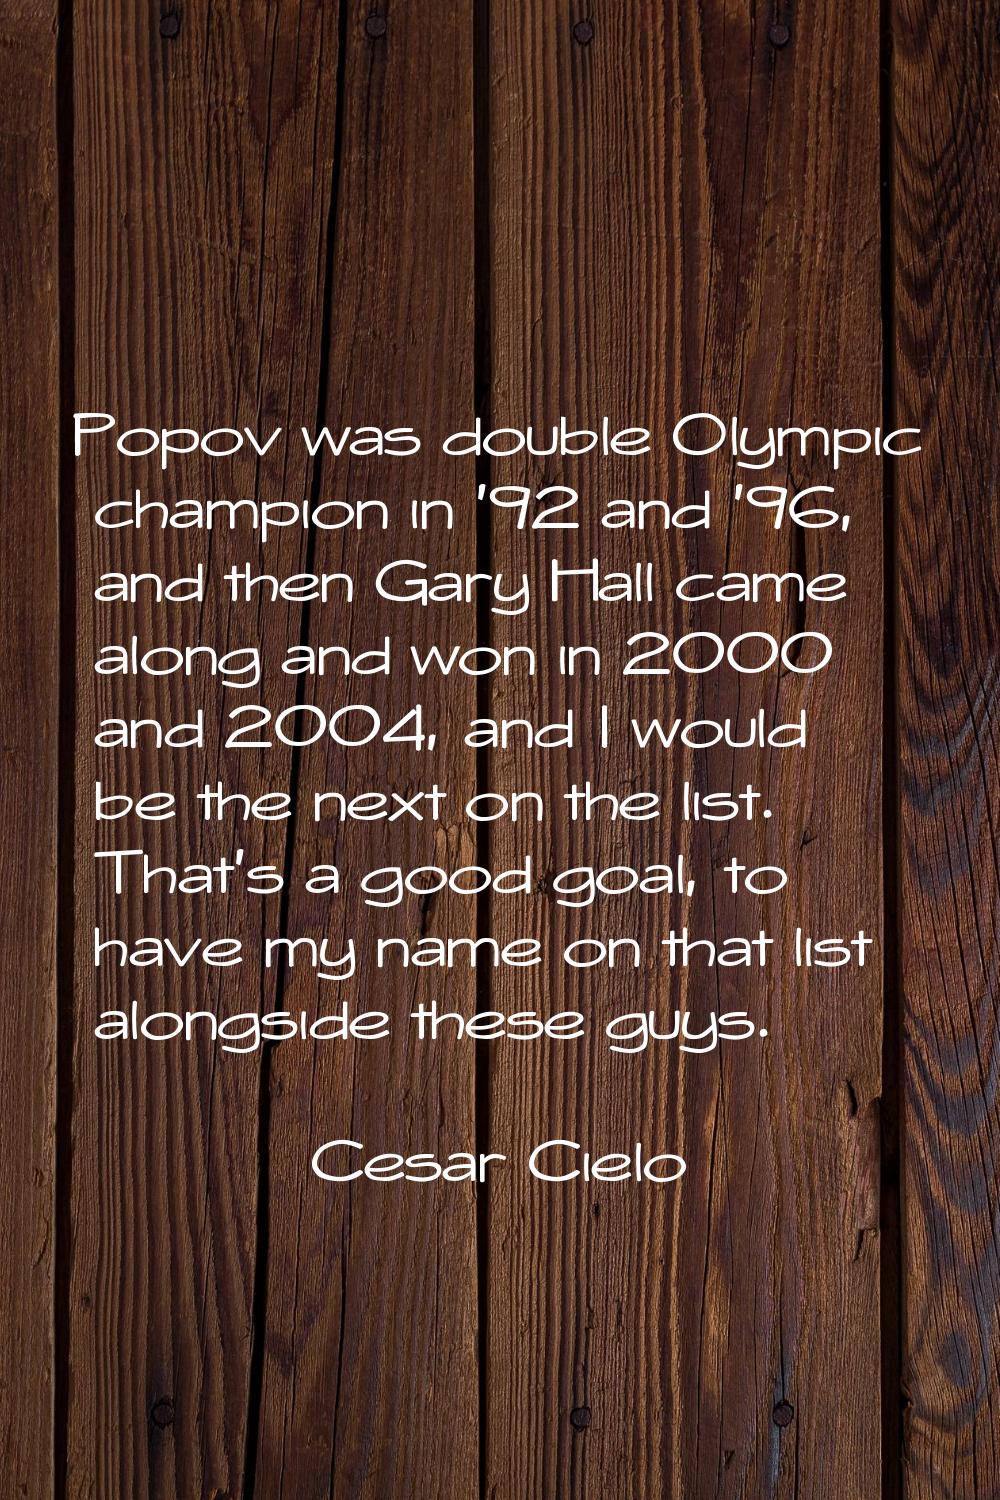 Popov was double Olympic champion in '92 and '96, and then Gary Hall came along and won in 2000 and